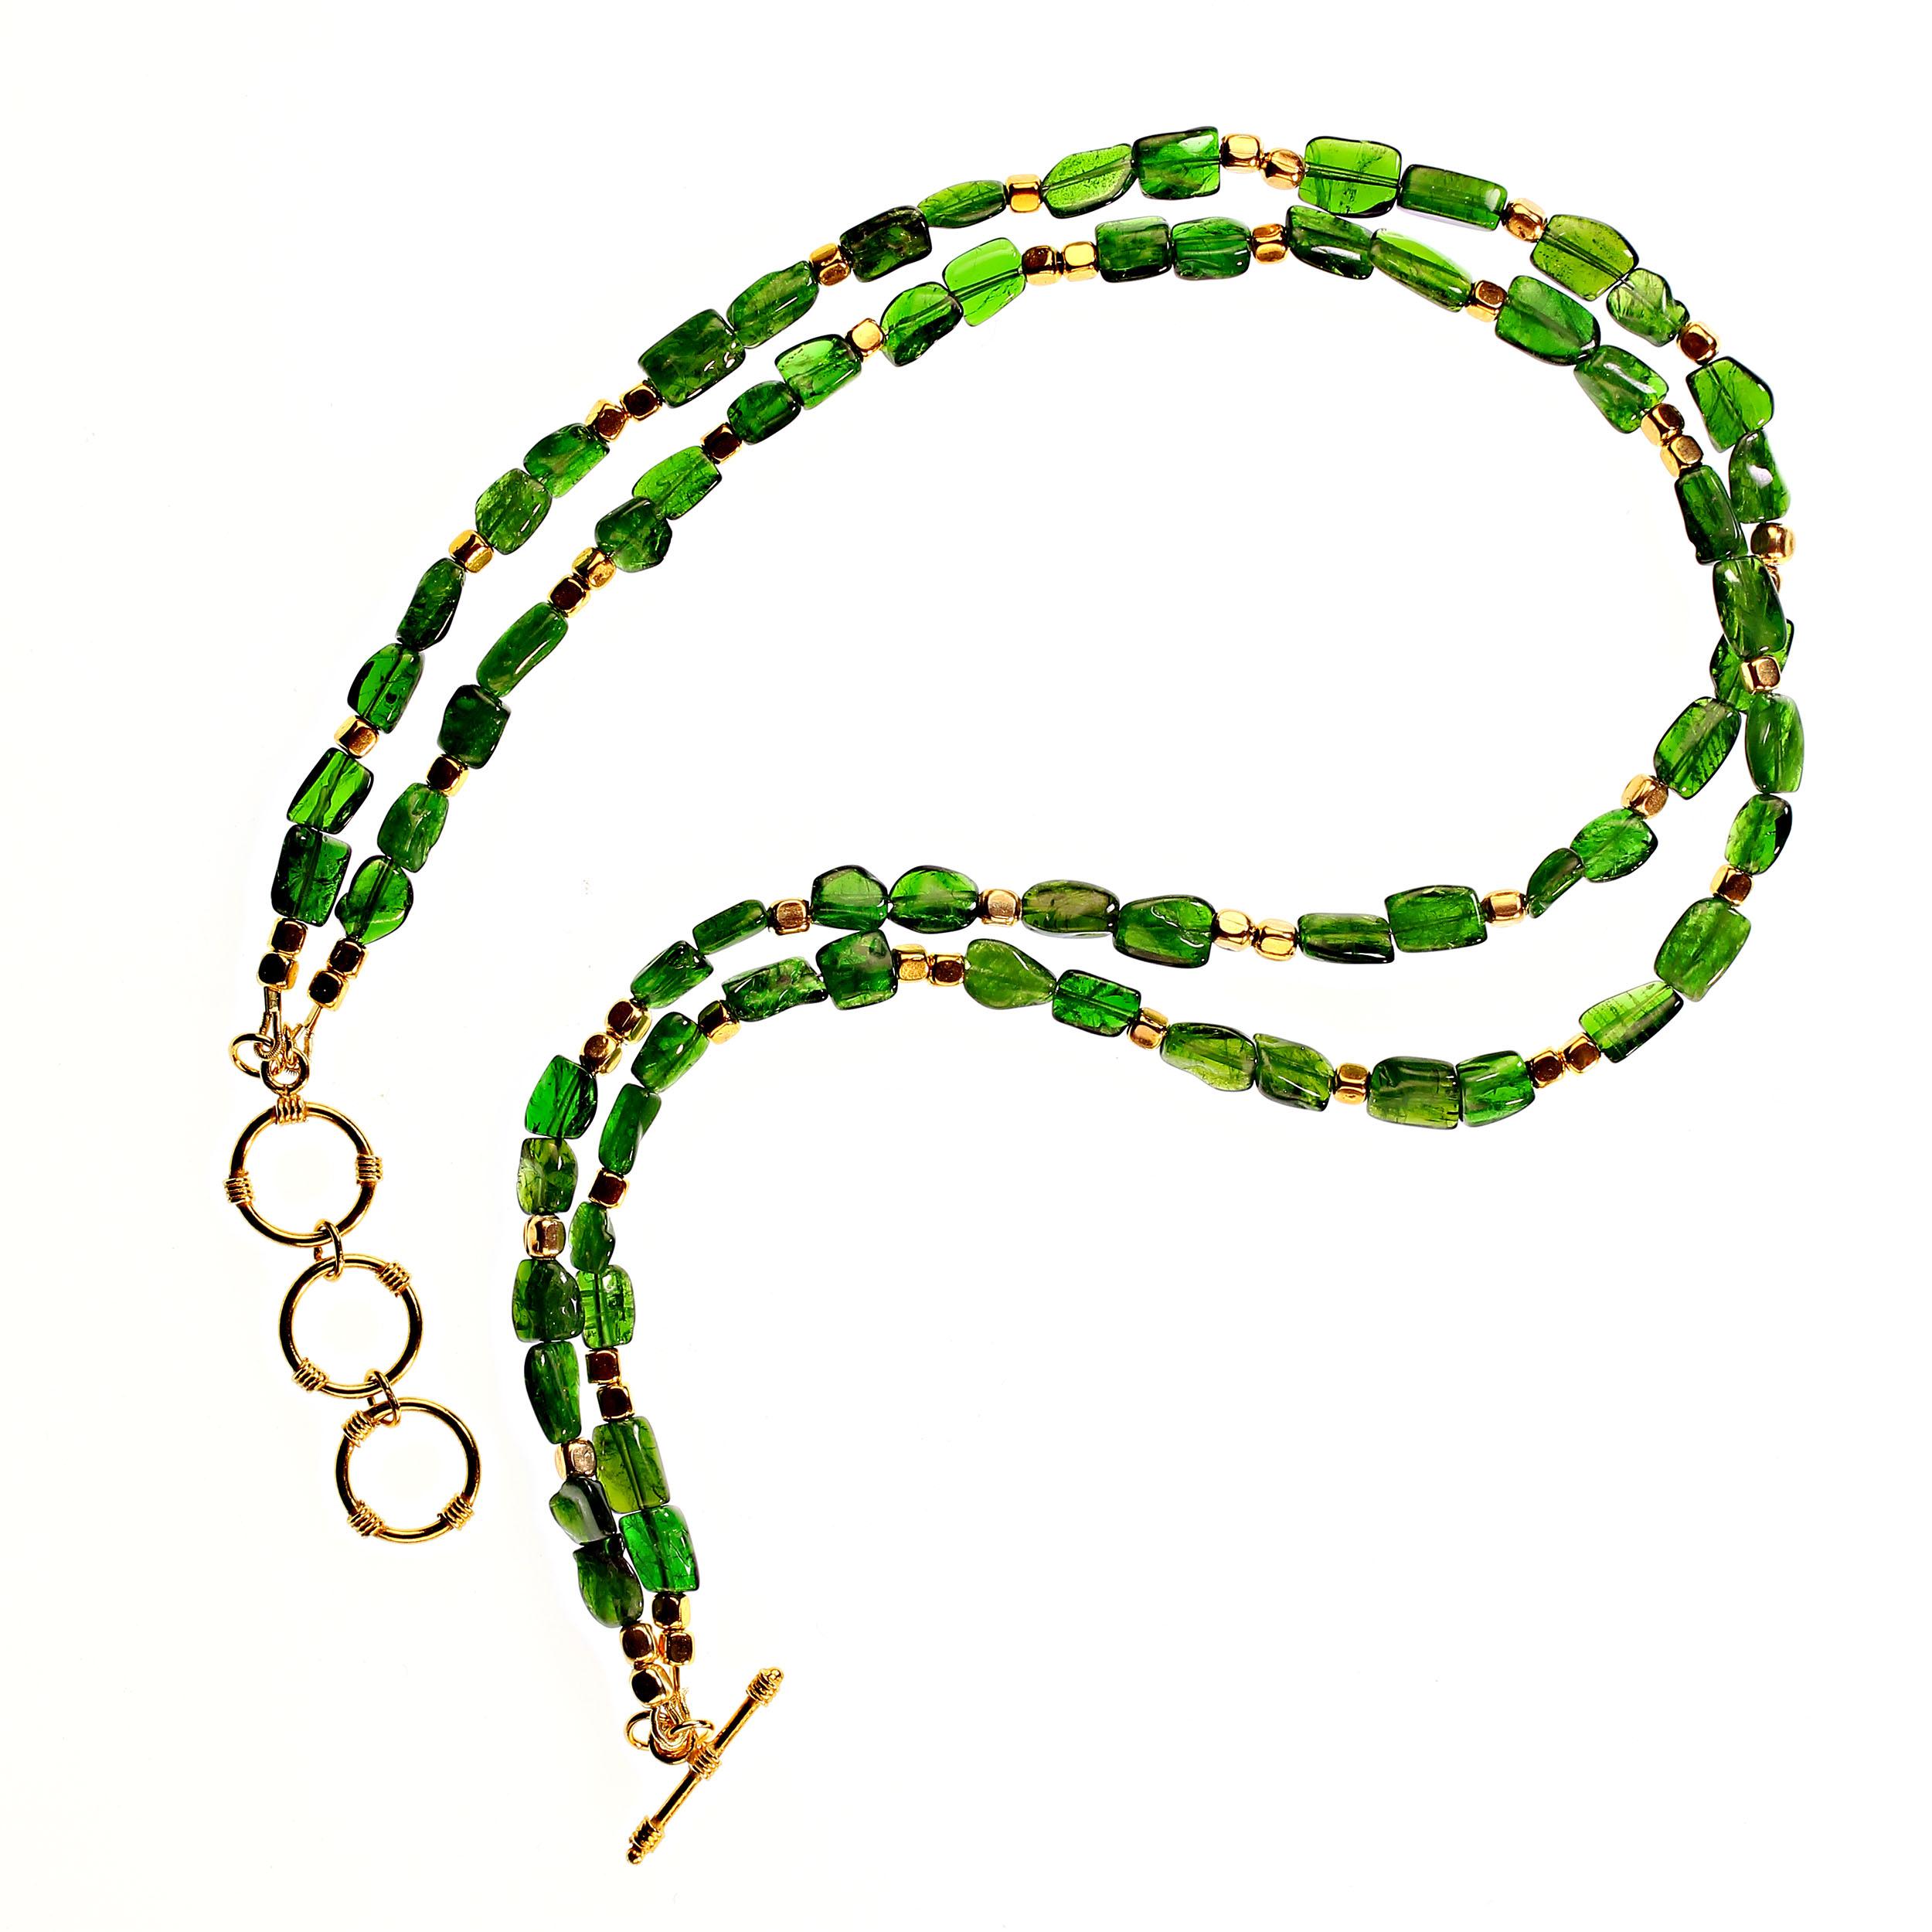 Women's or Men's AJD Brilliant Green Chrome Diopside Necklace with Goldy Accents  Great Gift! For Sale